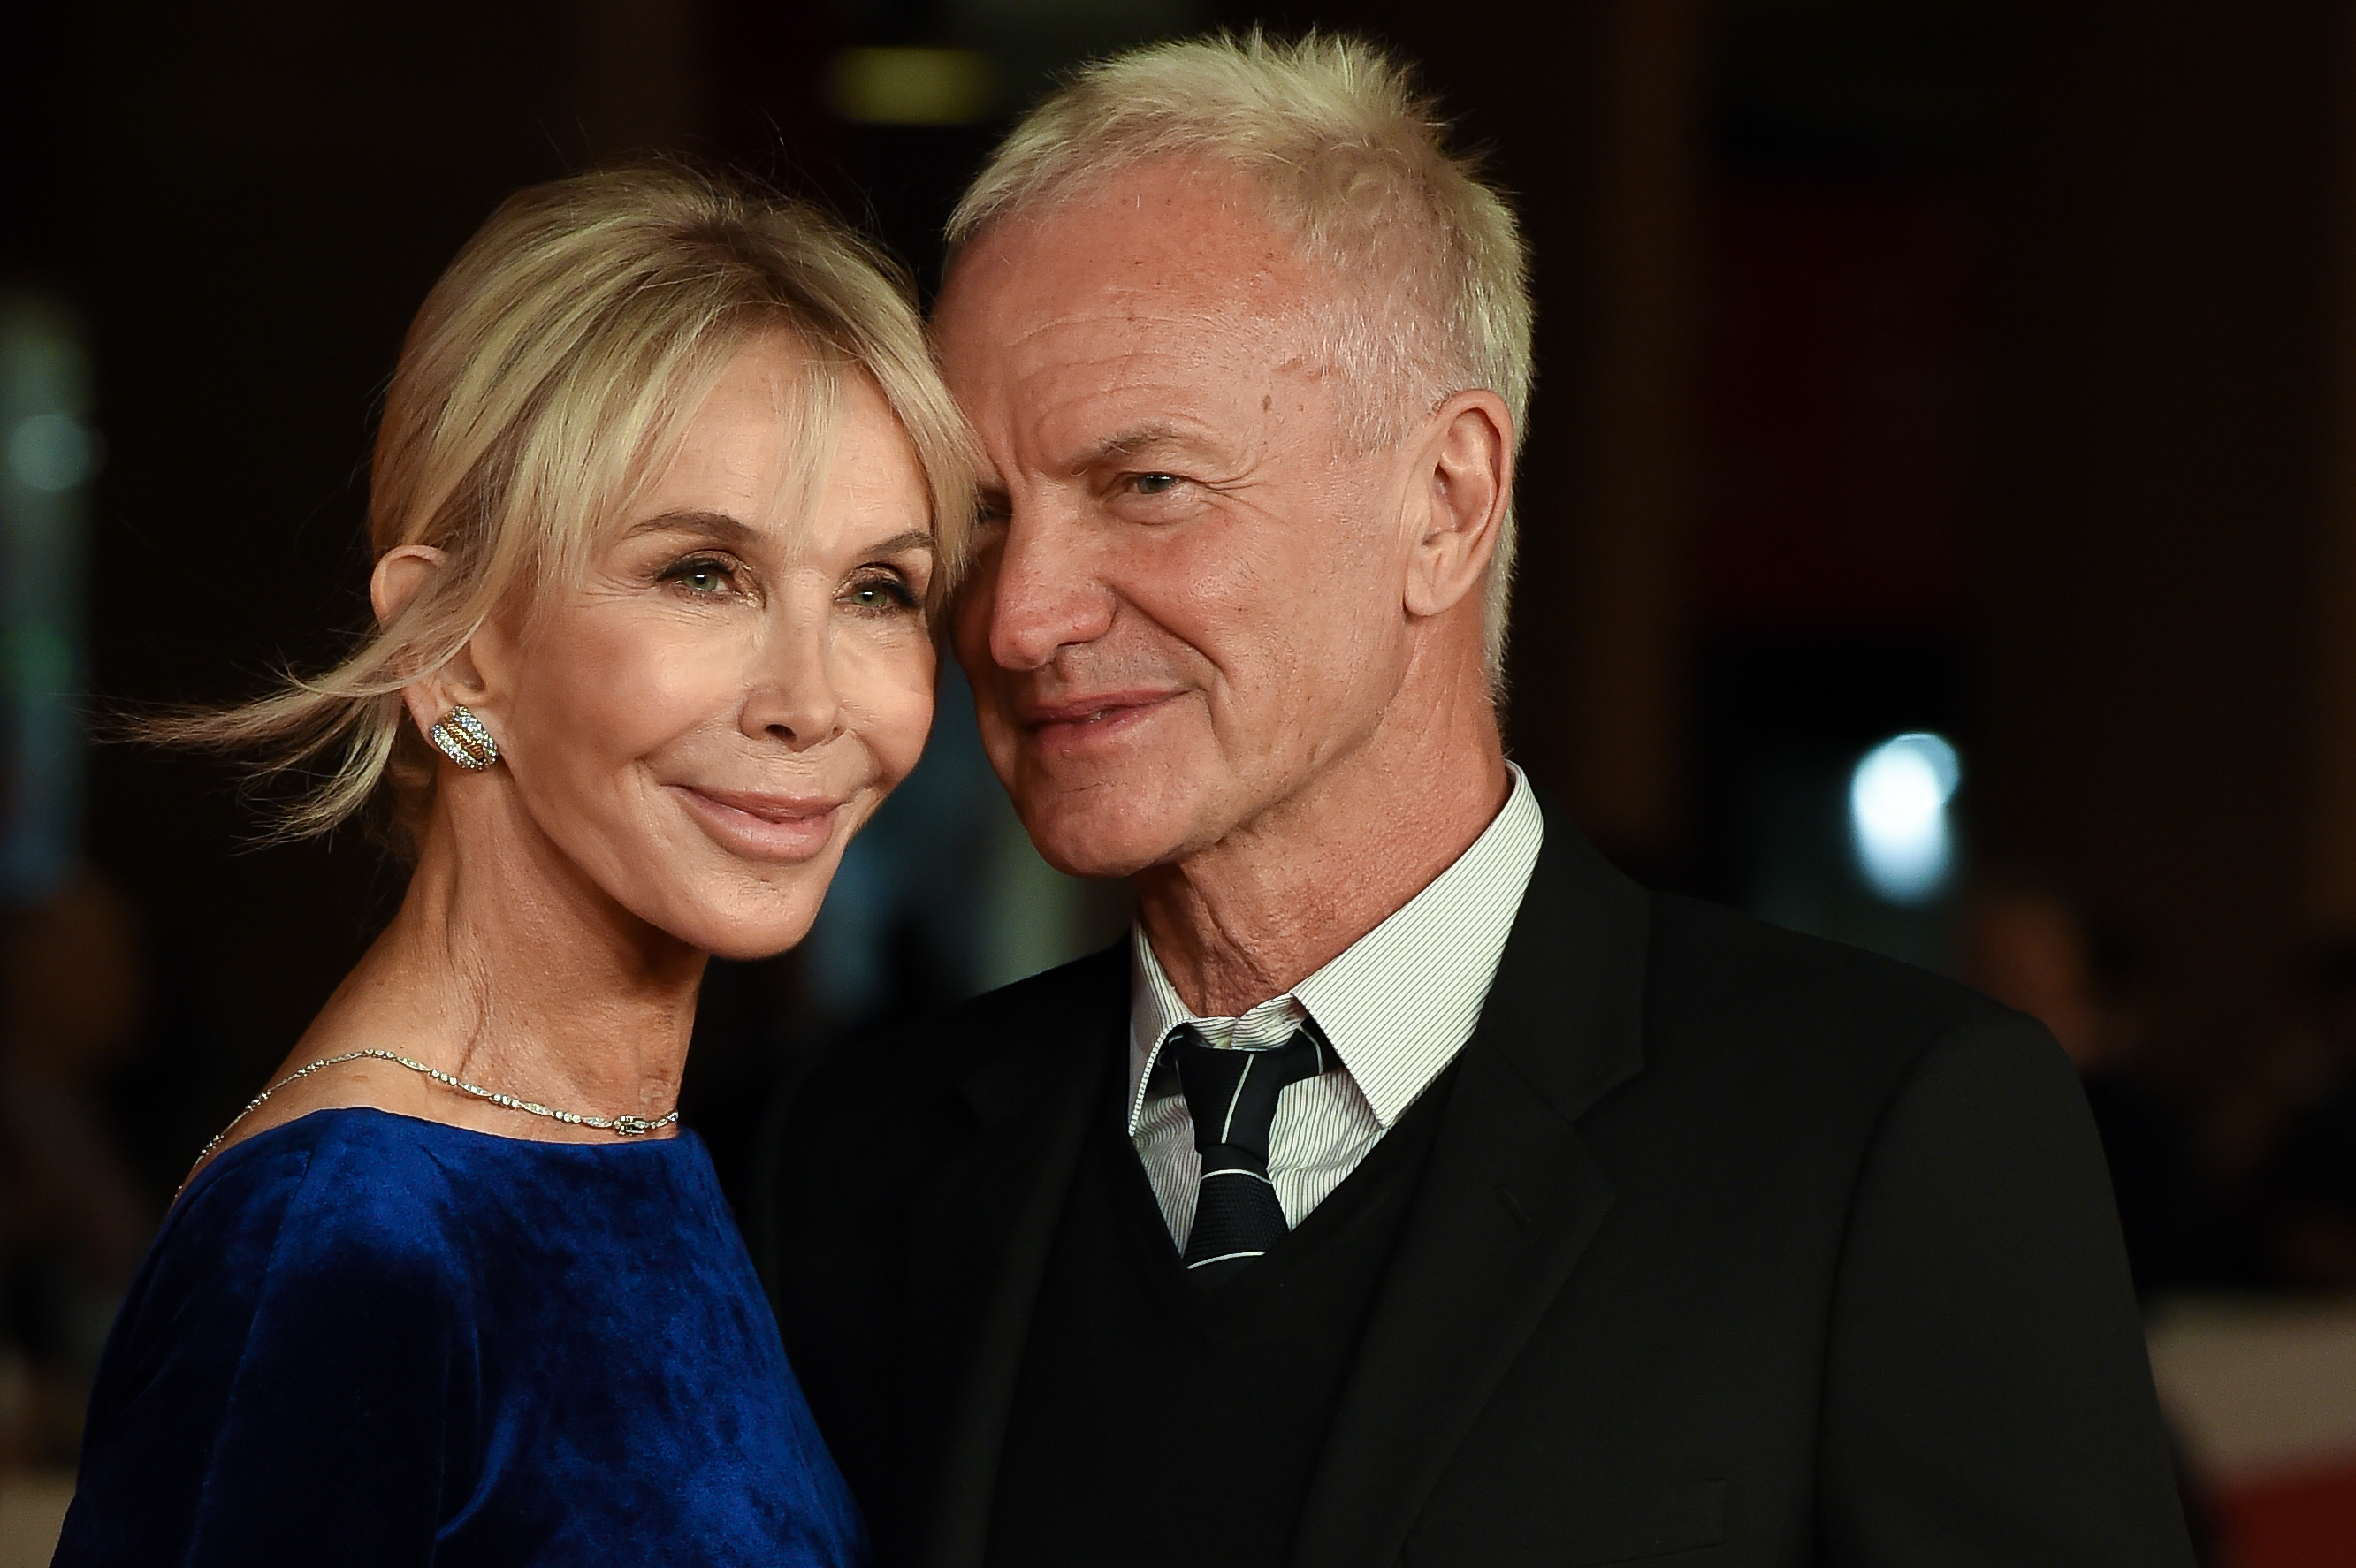 Sting and Trudie Styler at Rome Film Fest in Italy on October 23, 2023. | Source: Getty Images